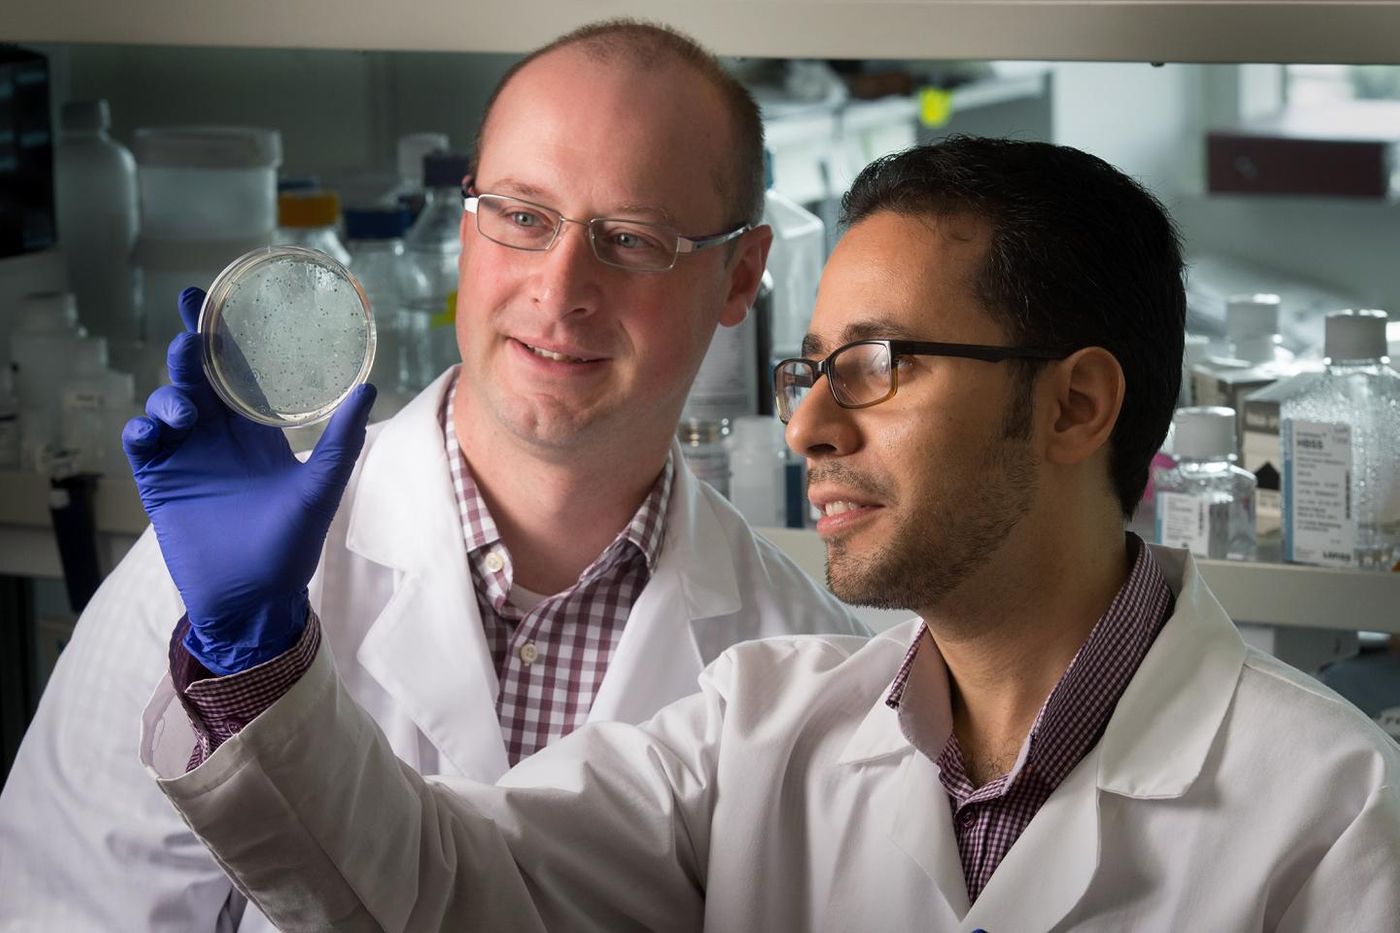 Corresponding author Benjamin Youngblood, PhD with first author Hazem Ghoneim. Credit: Seth Dixon / St. Jude Children's Research Hospital